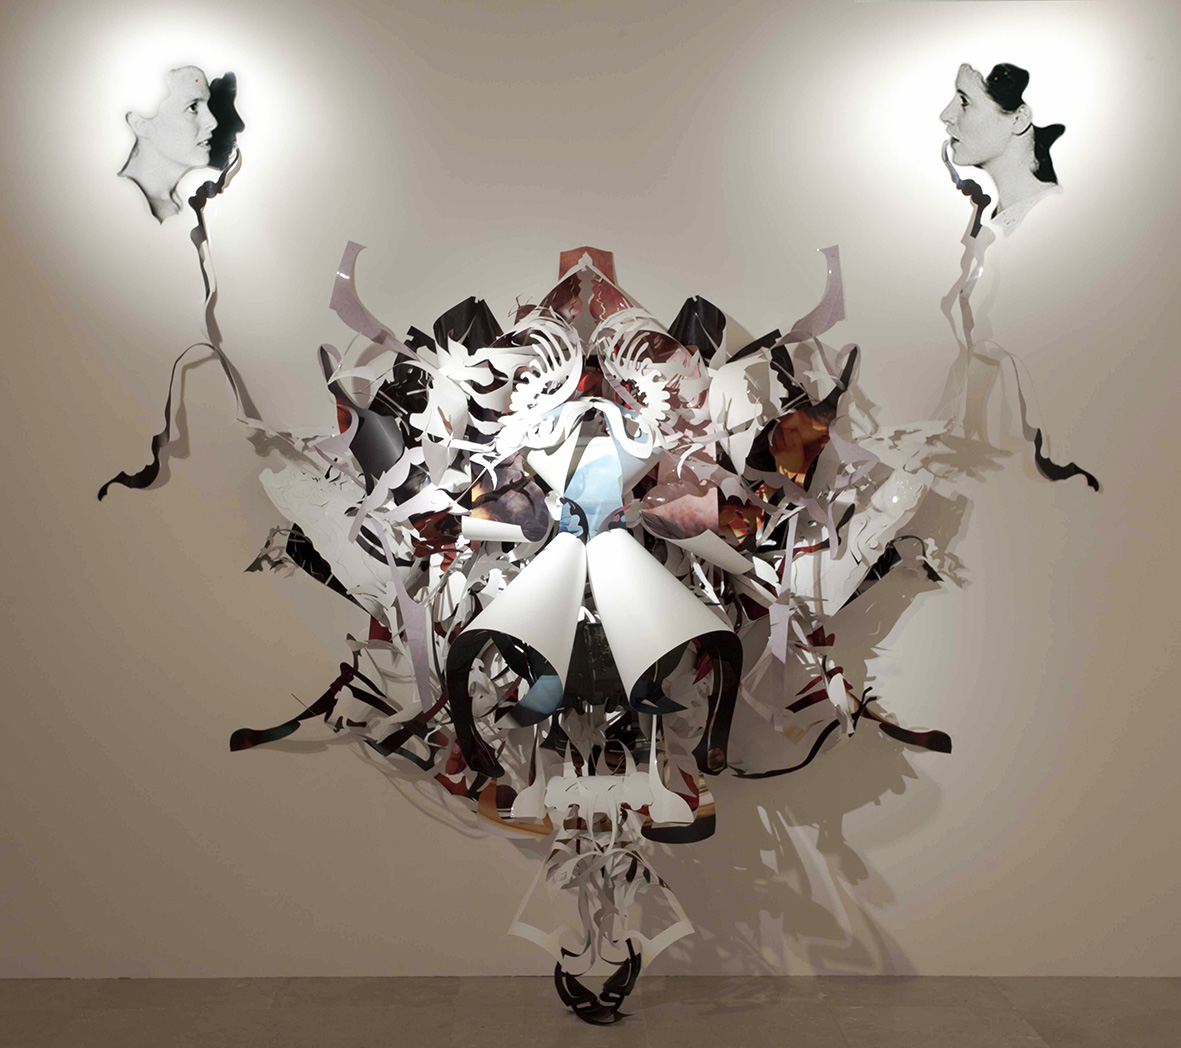 <p>L&#8217;Origine du Monde (2014), 250 x 250cm, cutout, folded, and entwined photographs, Total Environment, Museo Patio Herreriano</p>
